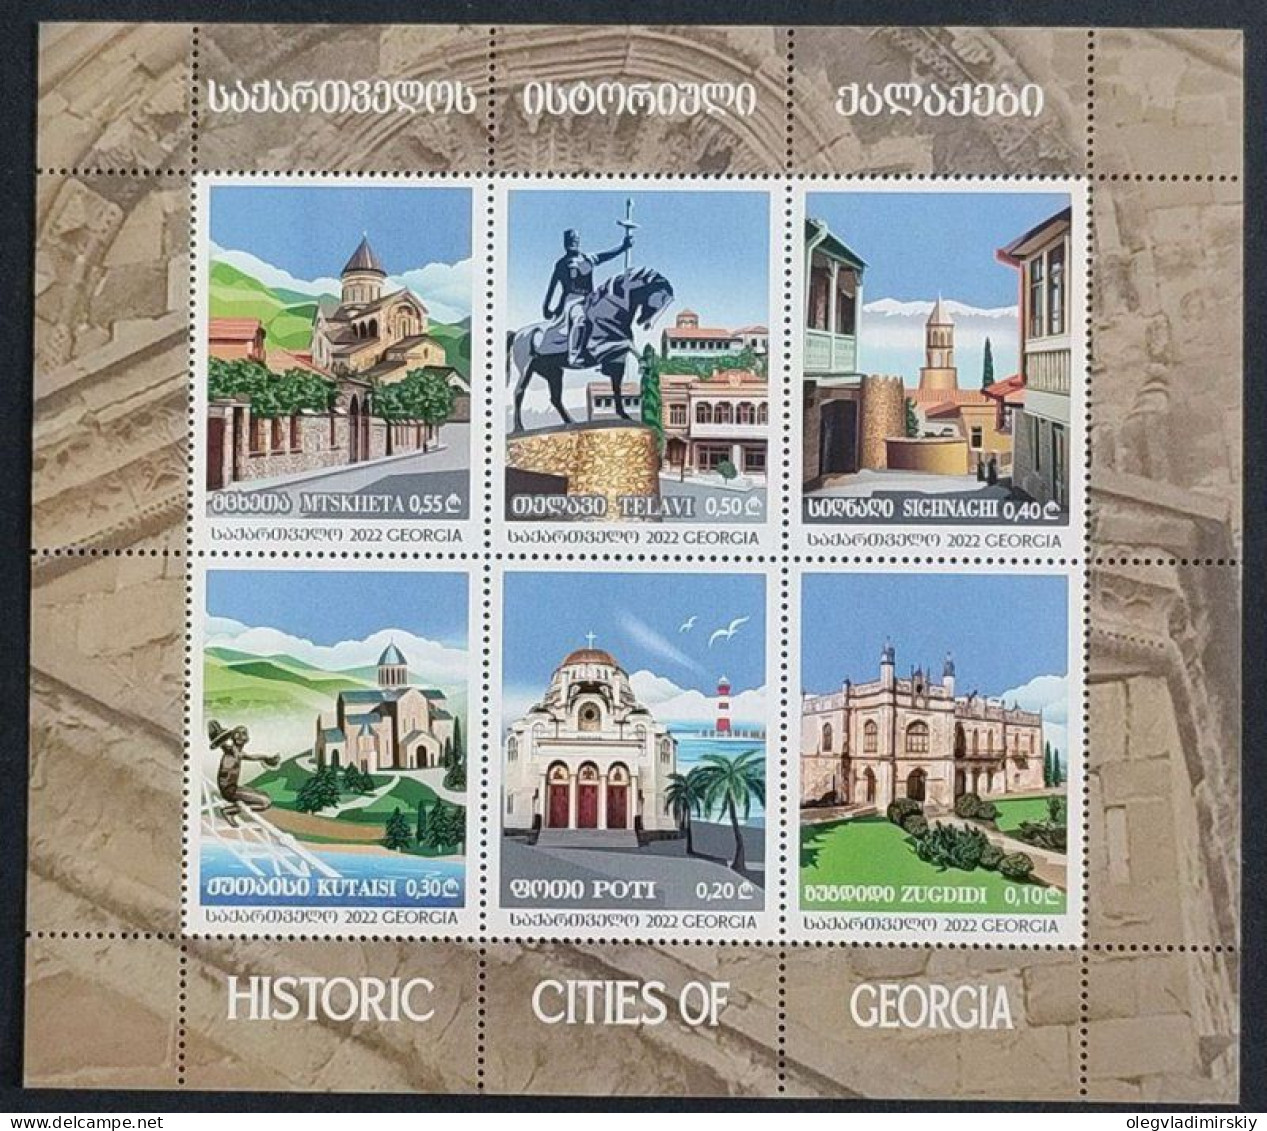 Georgia 2022 Historic Cities Of Georgia Poti Lighthouse Cathedrals Monuments Set Of 6 Stamps In Block MNH - Géorgie